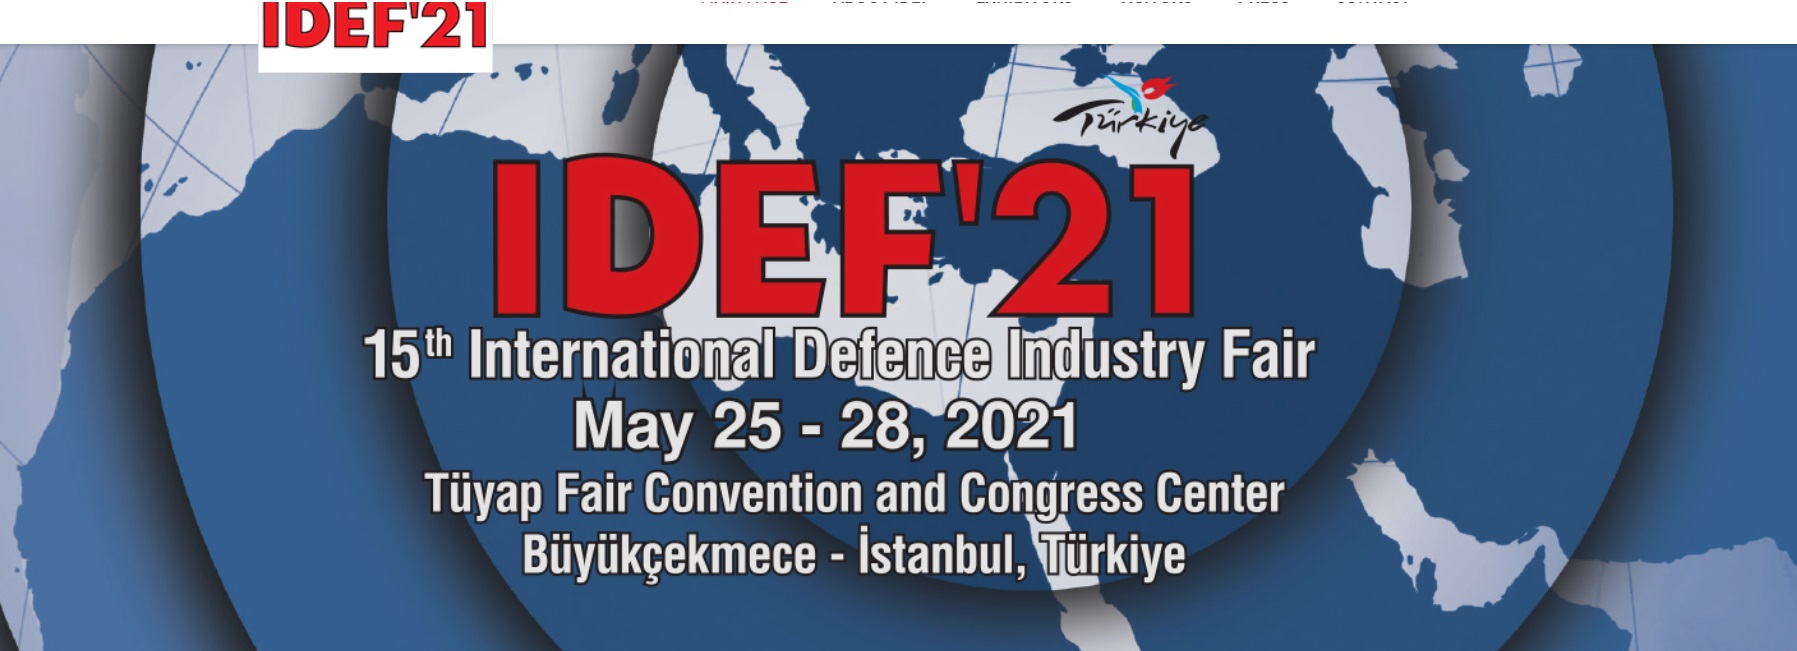 IDEF’21 will be held on 25-28 May 2021